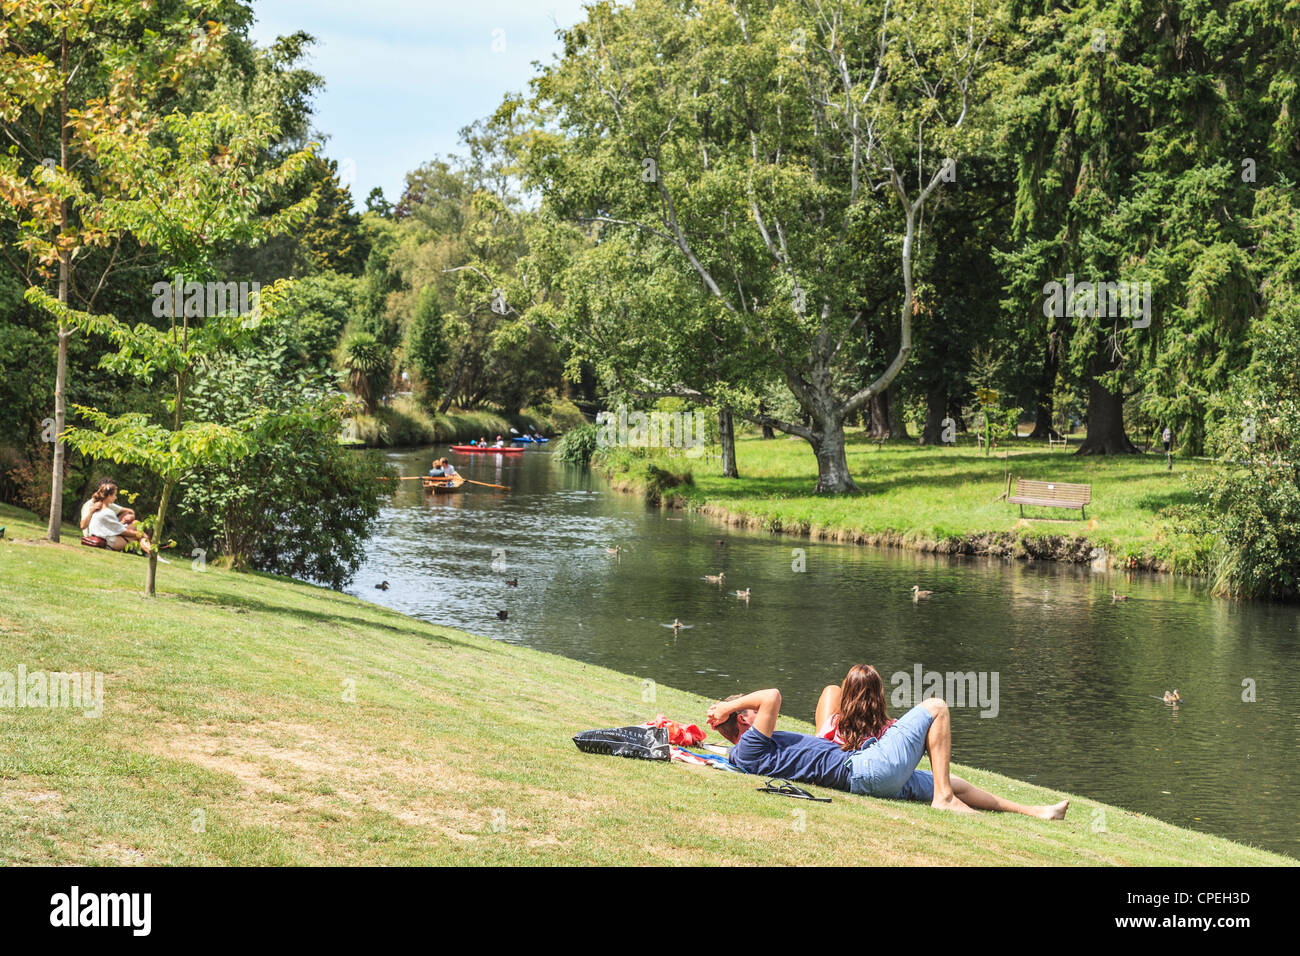 People relaxing on the banks of the Avon River in Hagley Park., Christchurch, New Zealand, Stock Photo